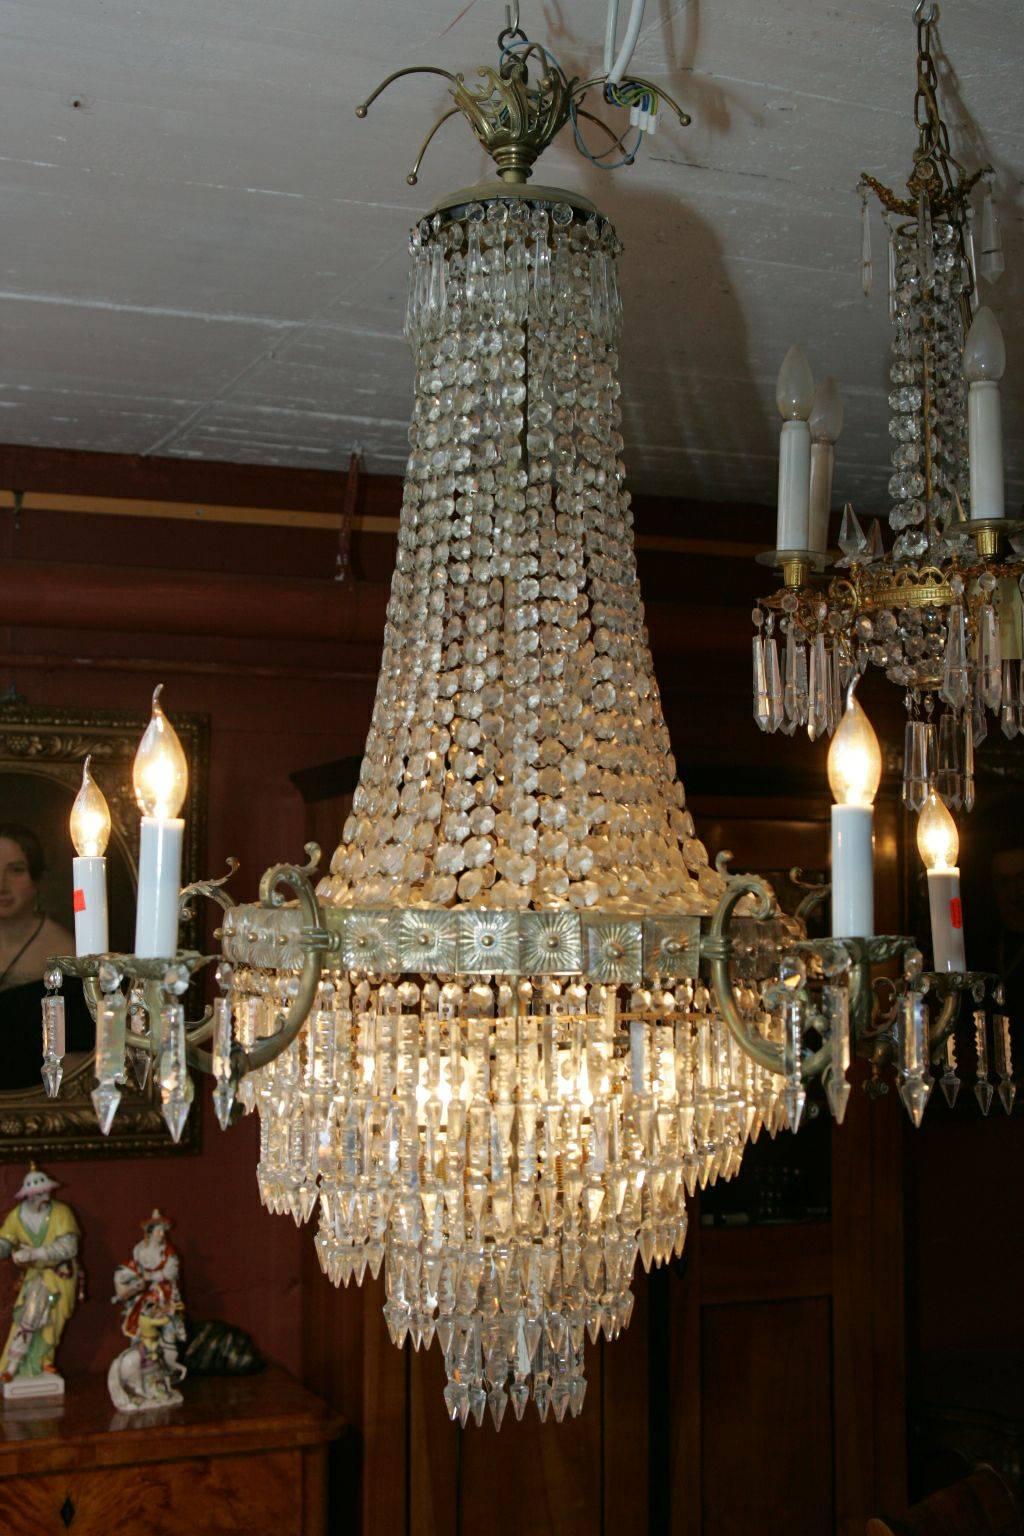 Classic antique ceiling chandelier in the Biedermeier style, circa 1900.
Brass chiseled. Baluster-shaped corpus of hand-wired, faceted glass cords. Broad luster ring outgoing five curved armor arms ending in vase-shaped grommets over round eaves.